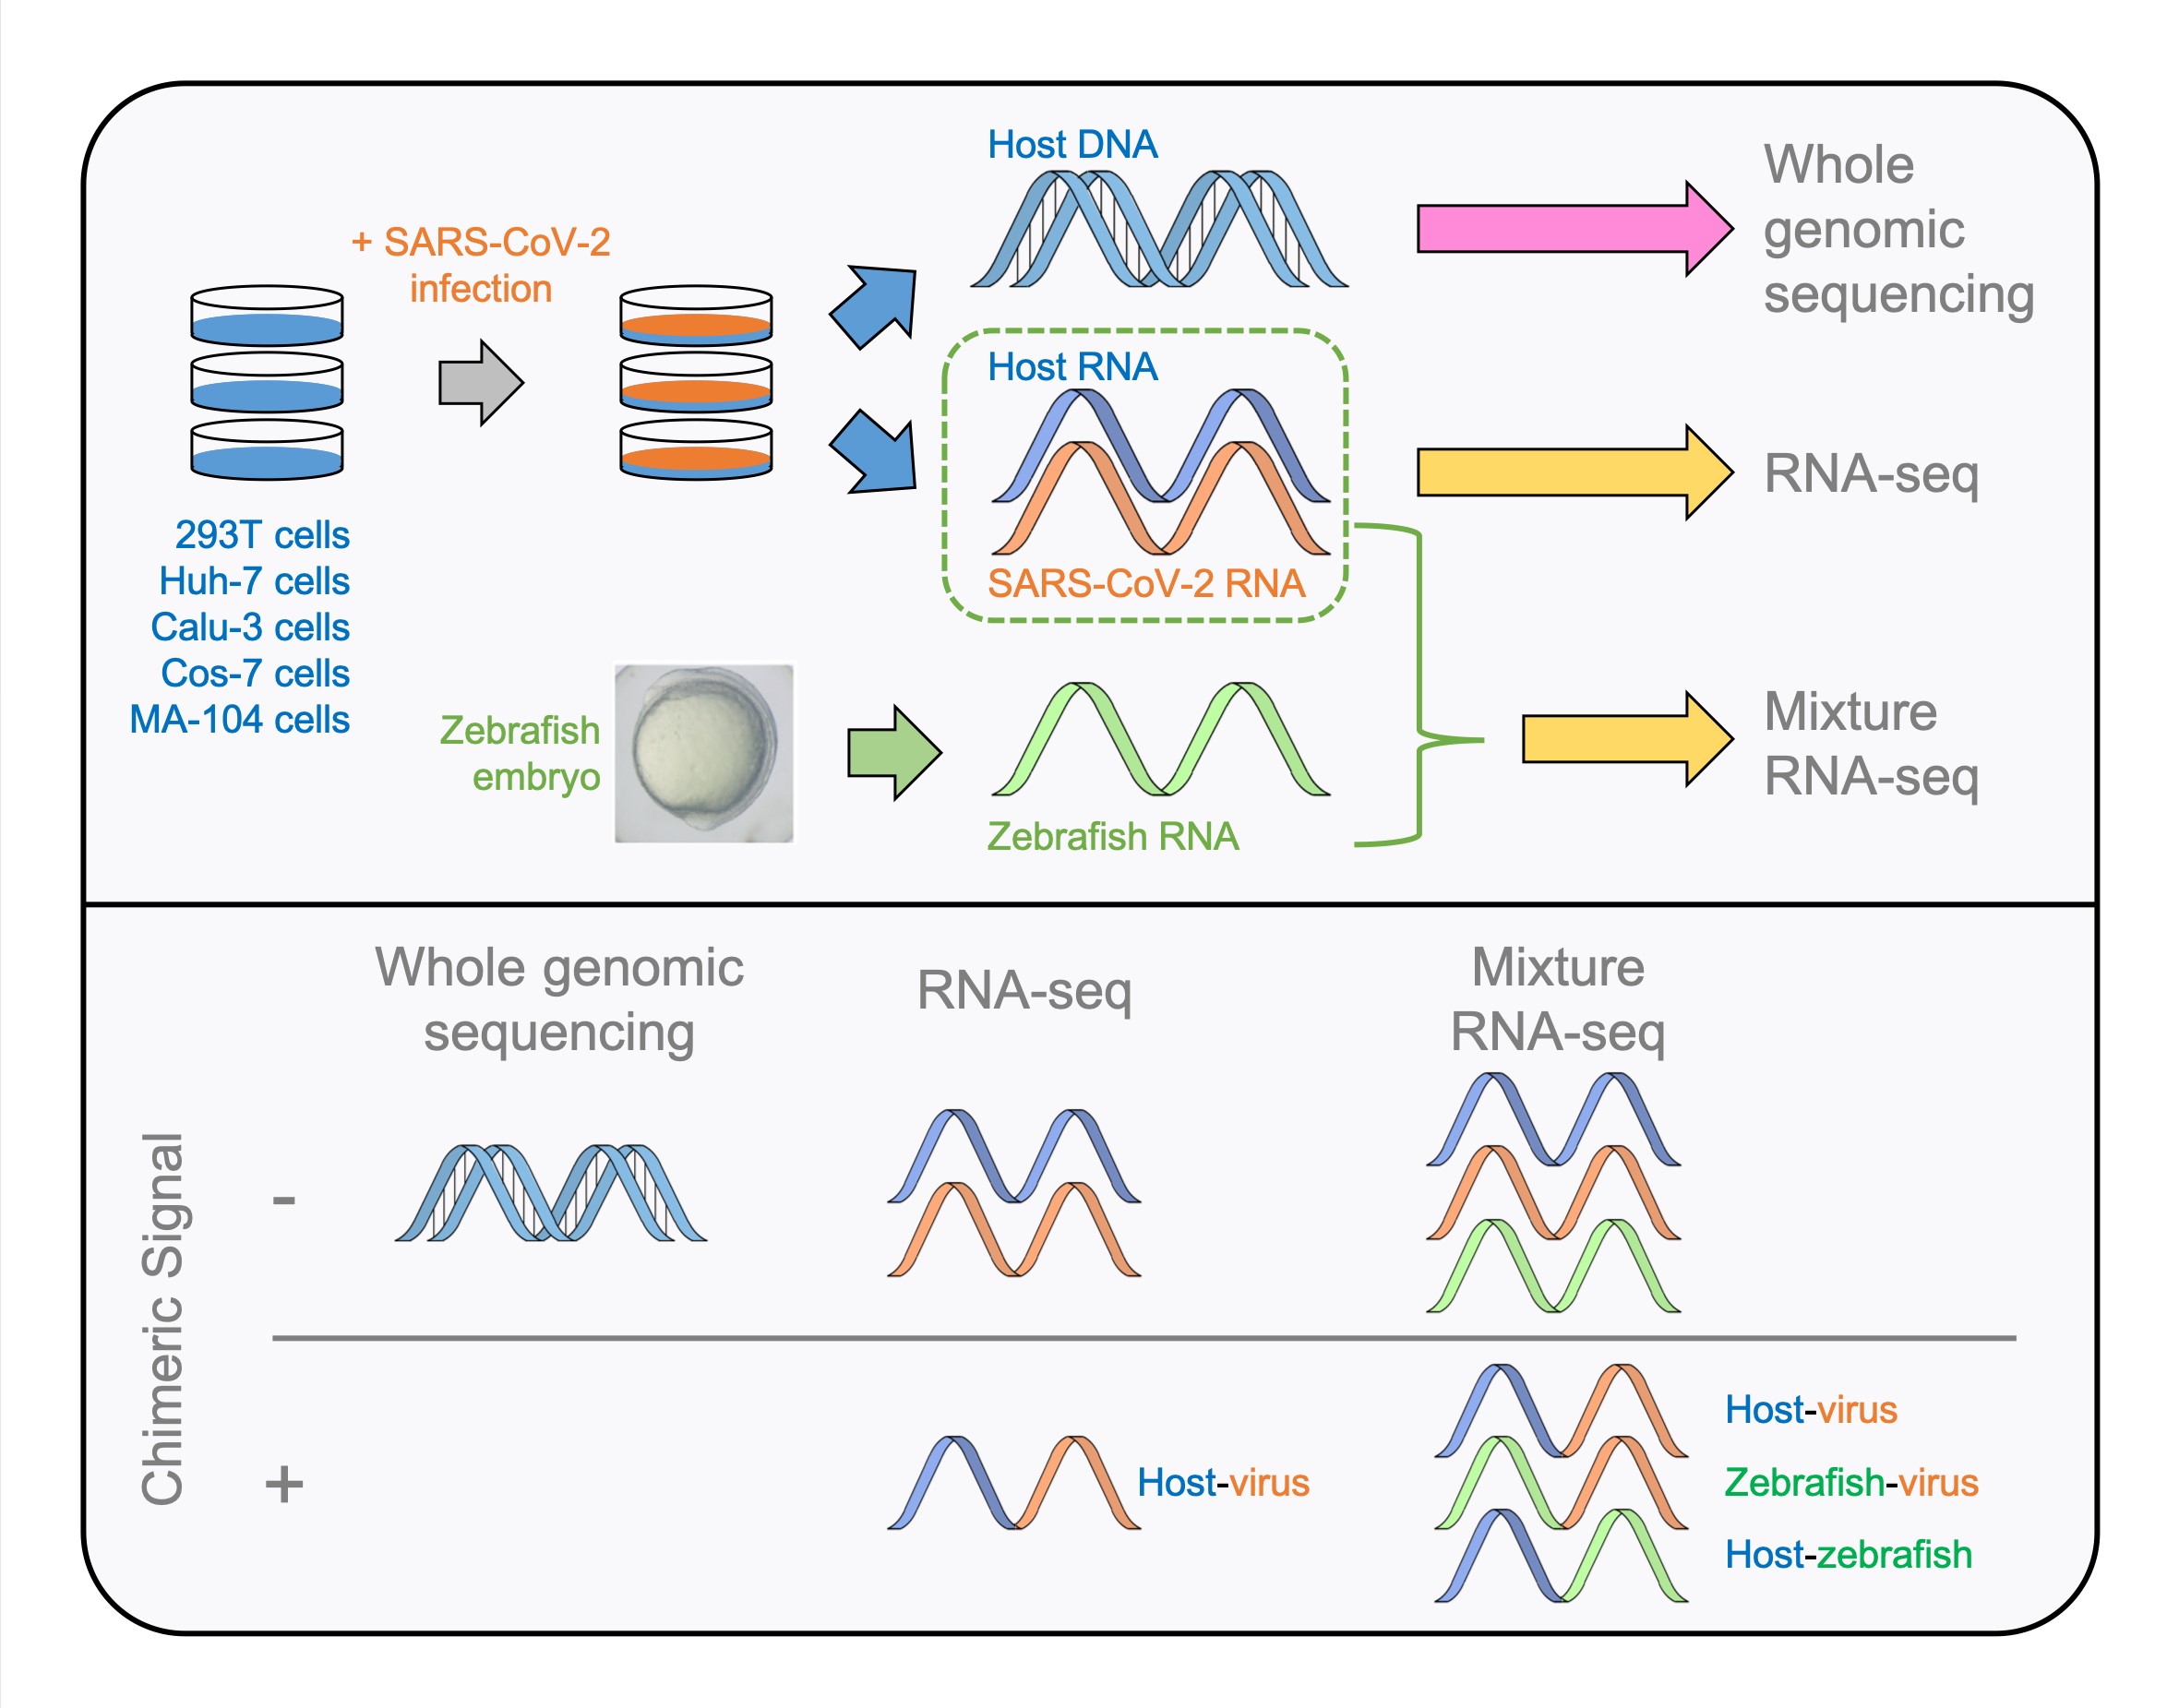 Analysis of RNA-seq and Whole Genome Sequencing Data Shows No Evidence for SARS-CoV-2 Integrating into Host Genome